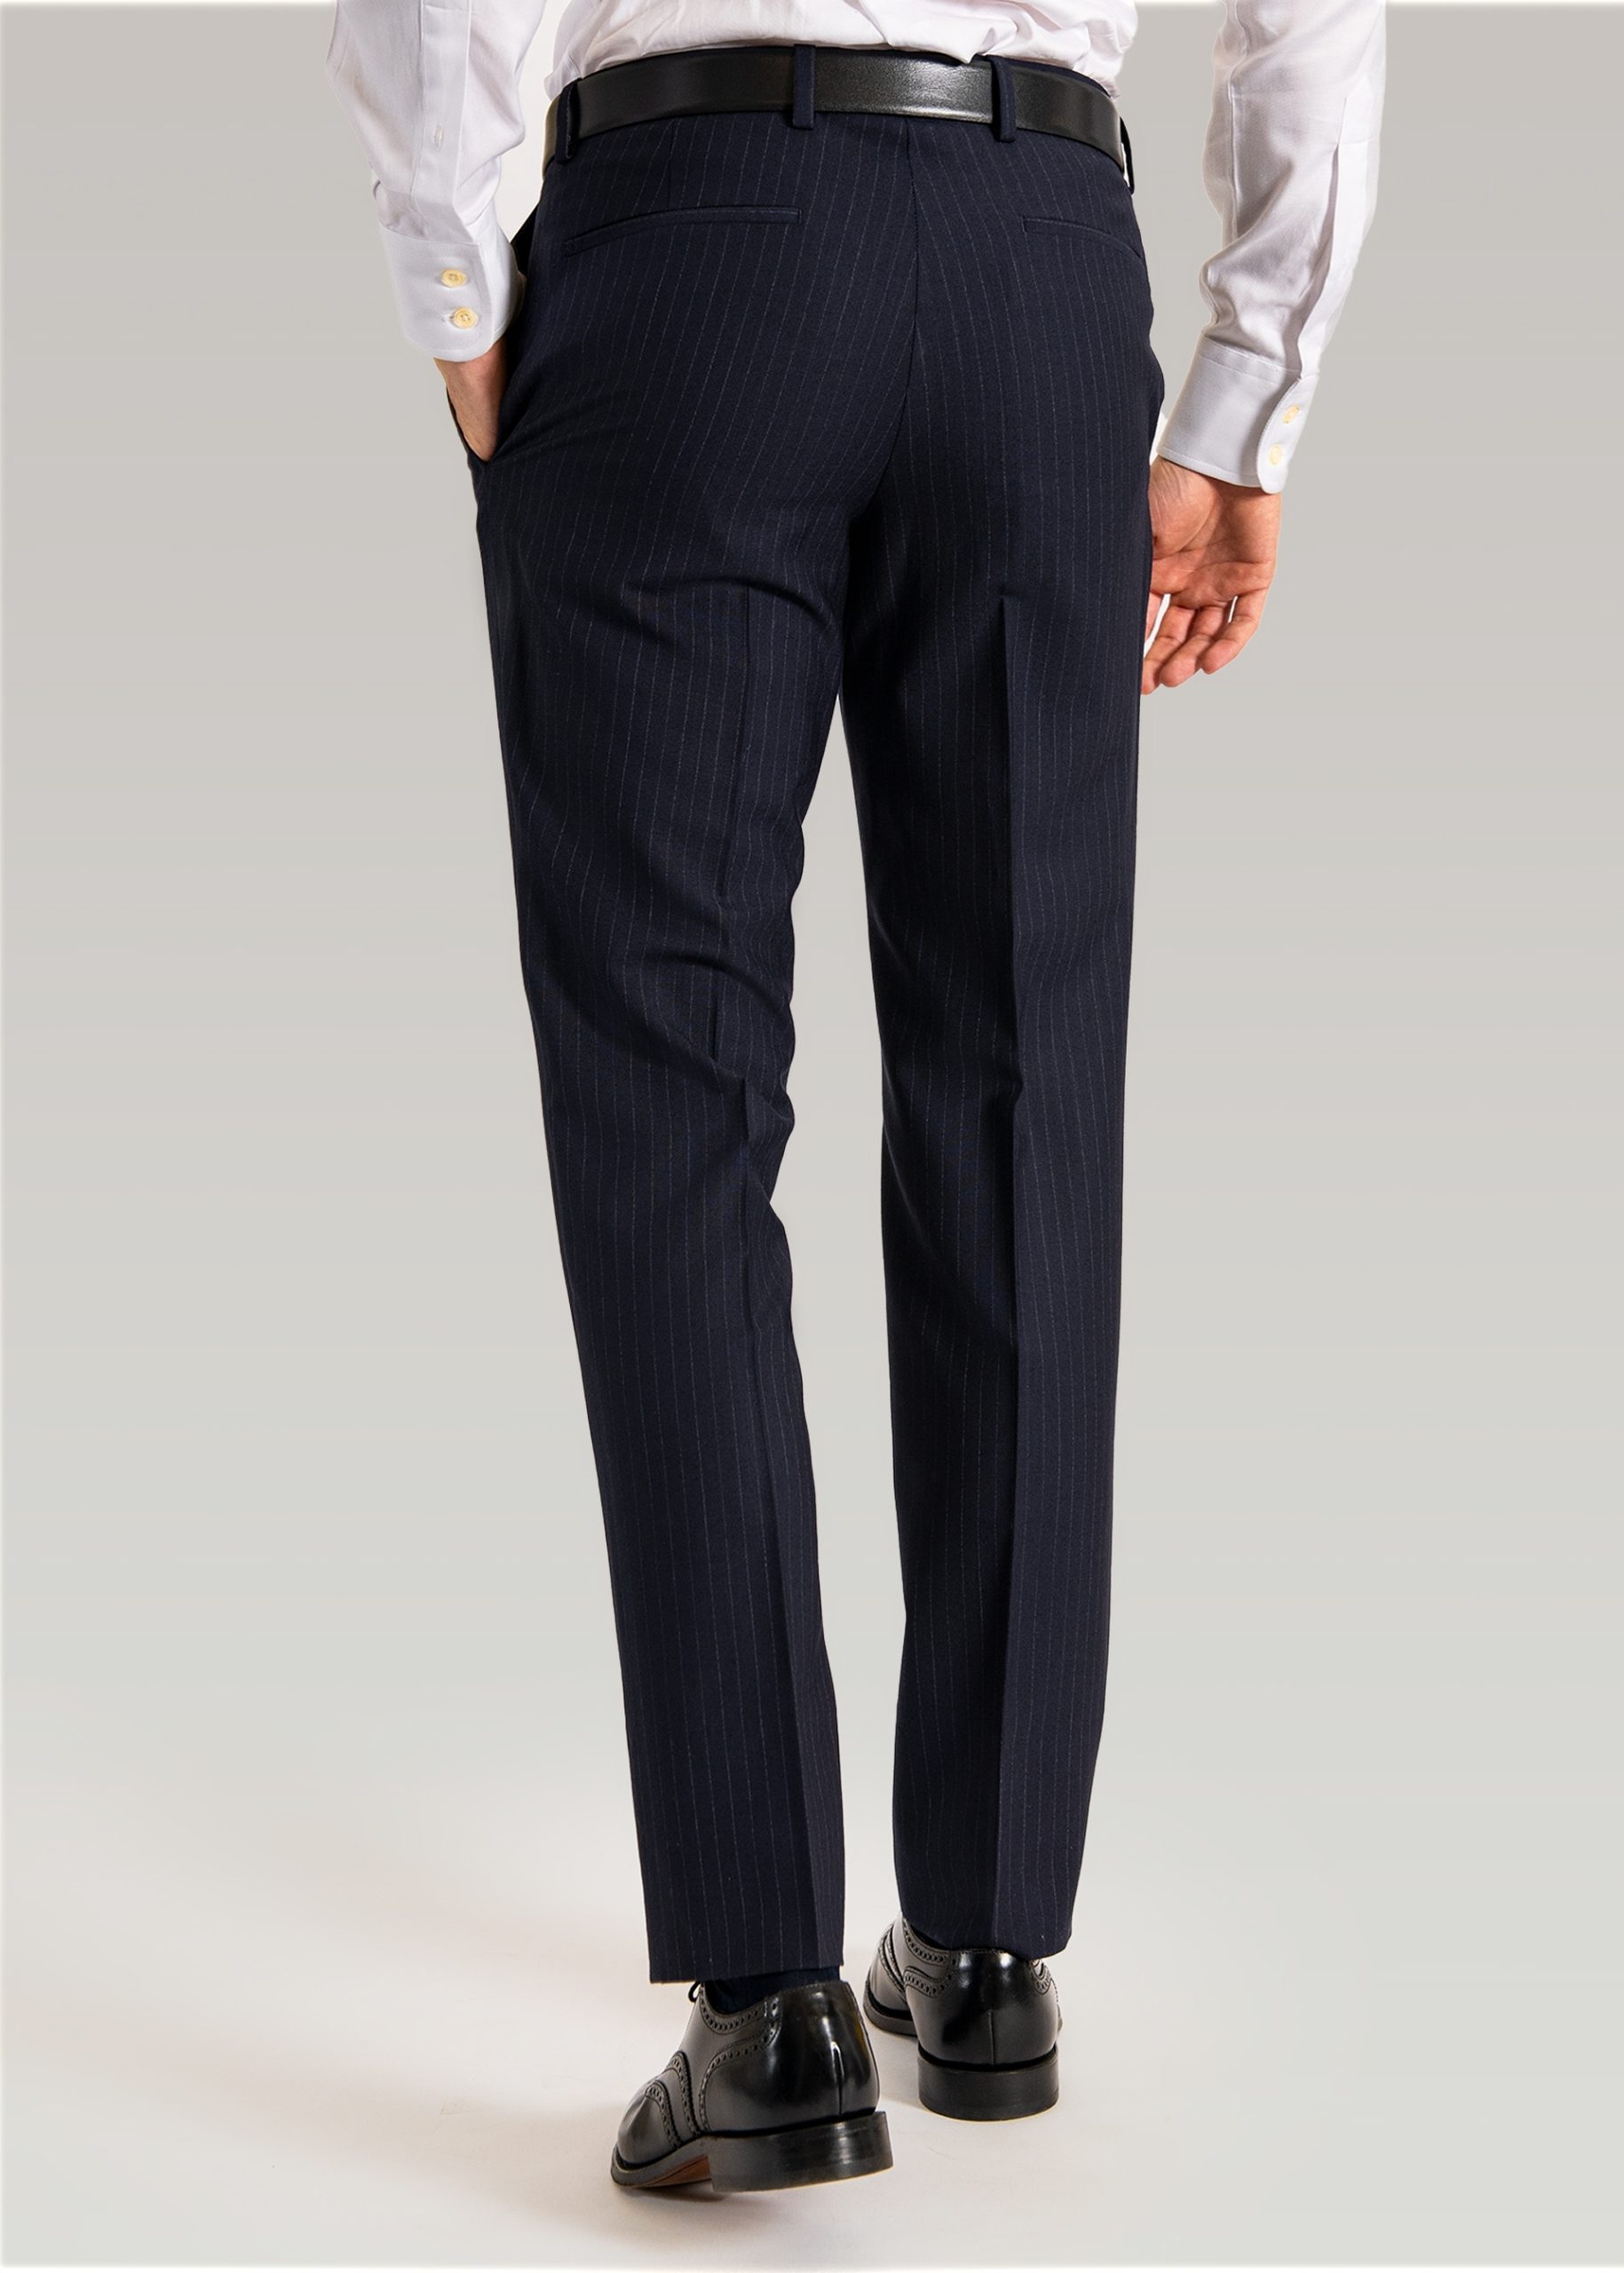 Formal navy striped suit trousers styled with black brogues